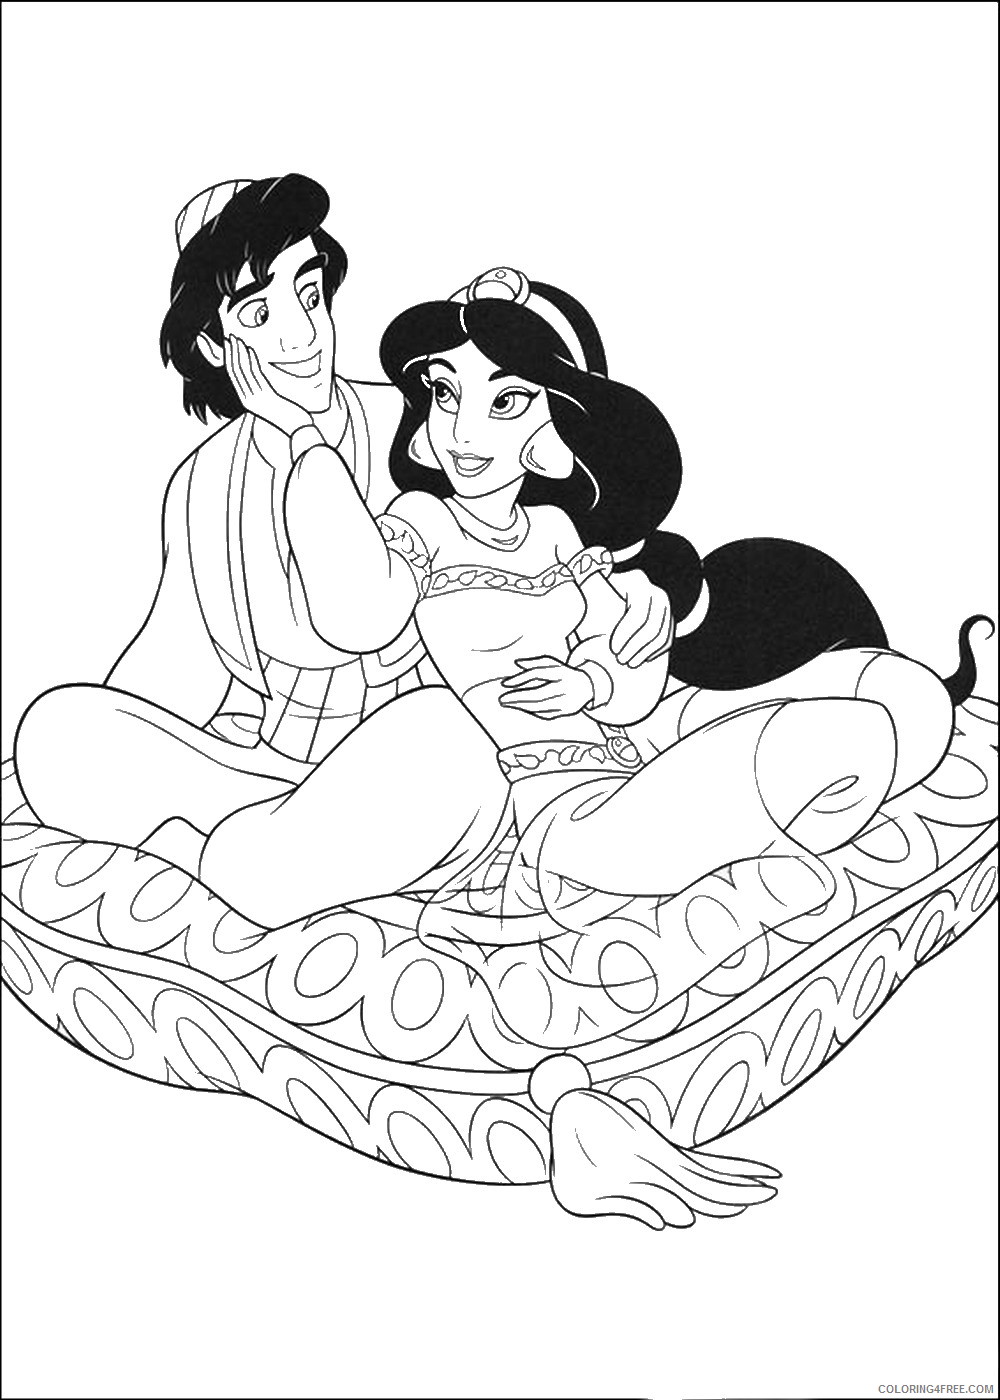 Aladdin Coloring Pages Cartoons aladdin_07 Printable 2020 0287 Coloring4free